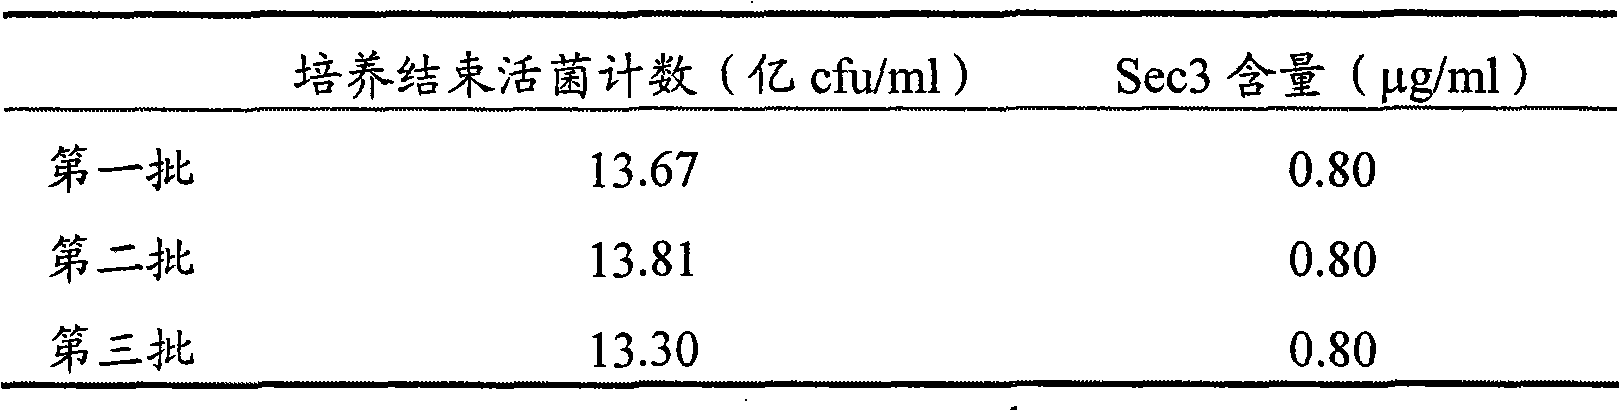 Staphylococcal enterotoxin C3 preparation, formulation, dosage and application thereof